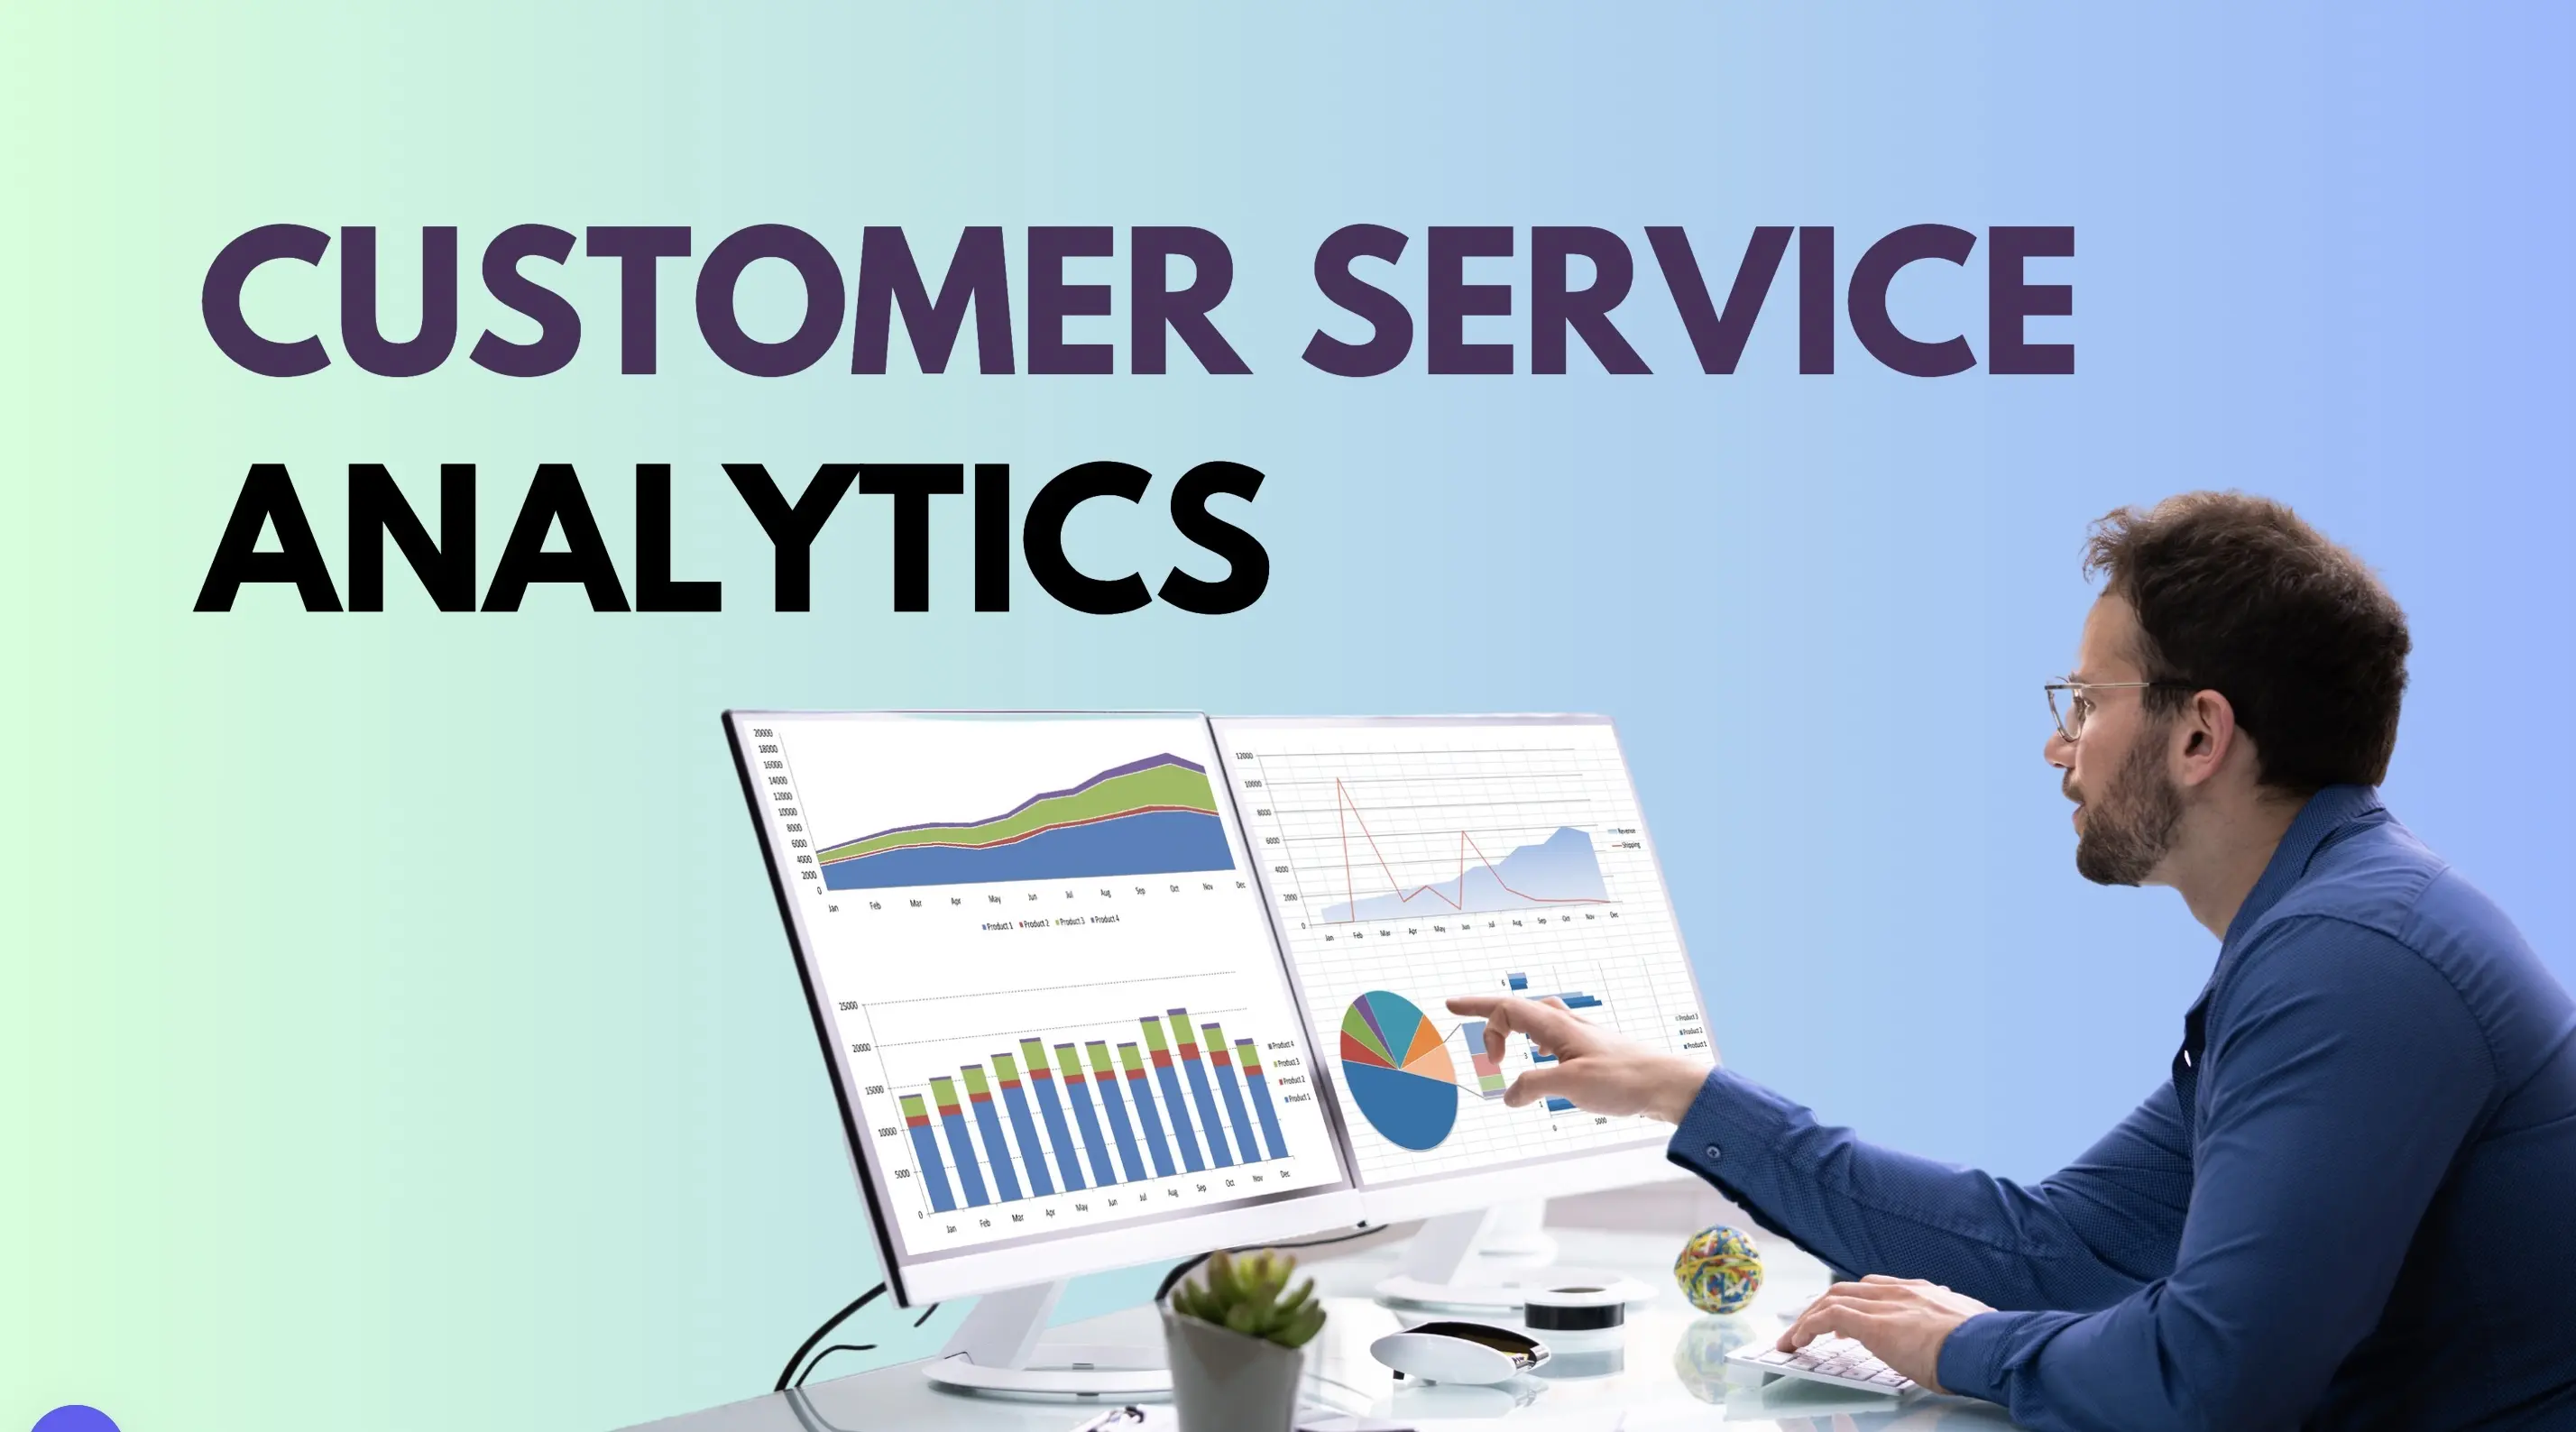 Applying Customer Service Analytics to Level Up Your Support